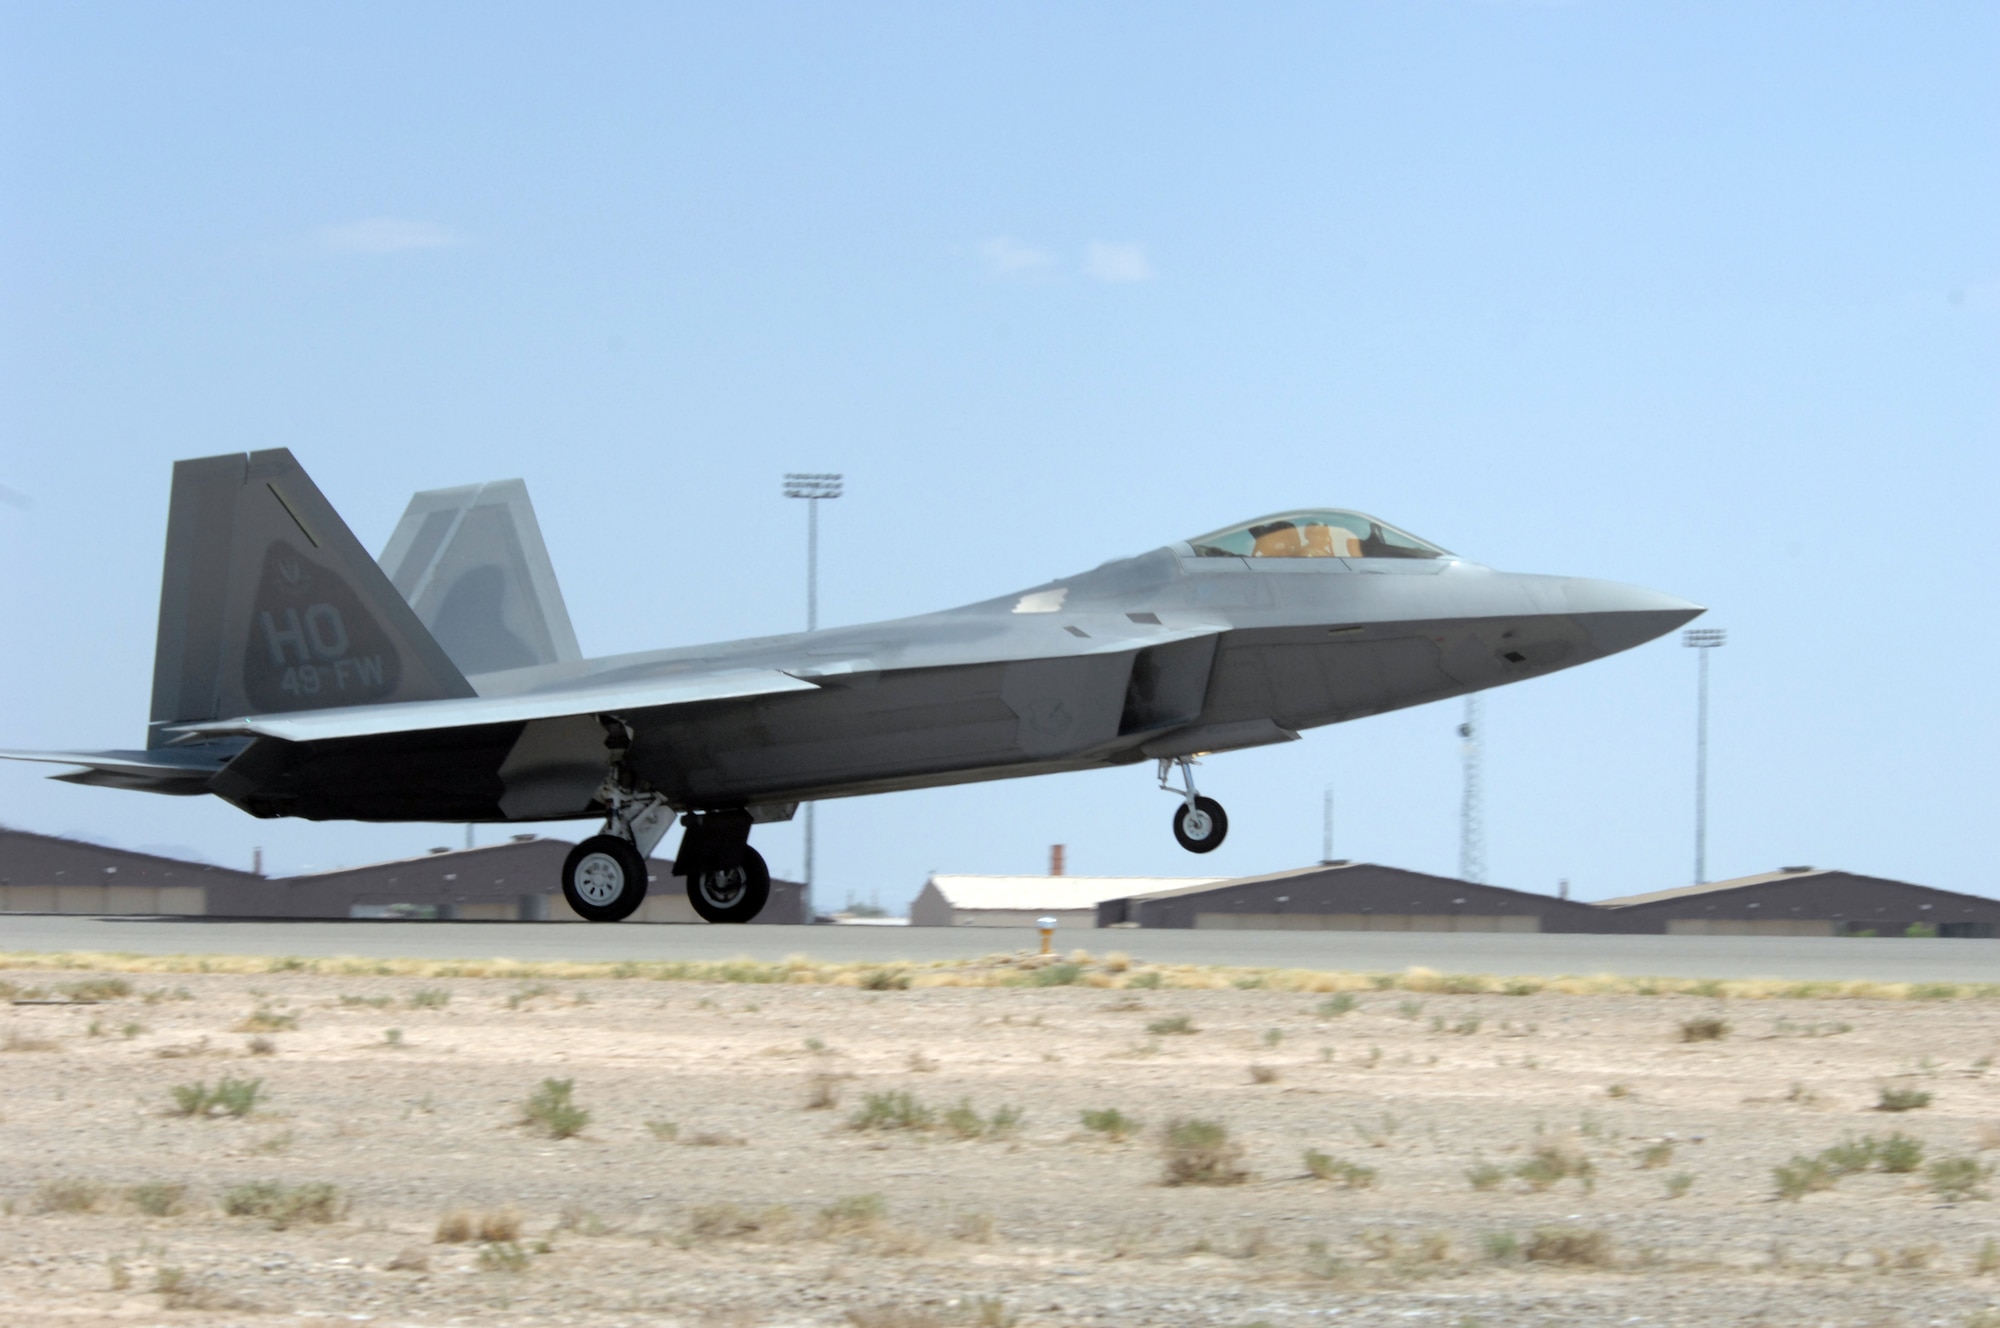 An F-22 Raptor flown by Col. Jeff Harrigian, 49th Fighter Wing commander, arrives on Holloman Air Force Base, N.M., June 2.This is one of the first F-22s assigned to Holloman. Prior to landing, the jets flew over the Tularosa Basin, the community had the chance to witness the future of Holloman Air Force Base.

(U.S. Air Force photo/Senior Airman Anthony Nelson Jr)
